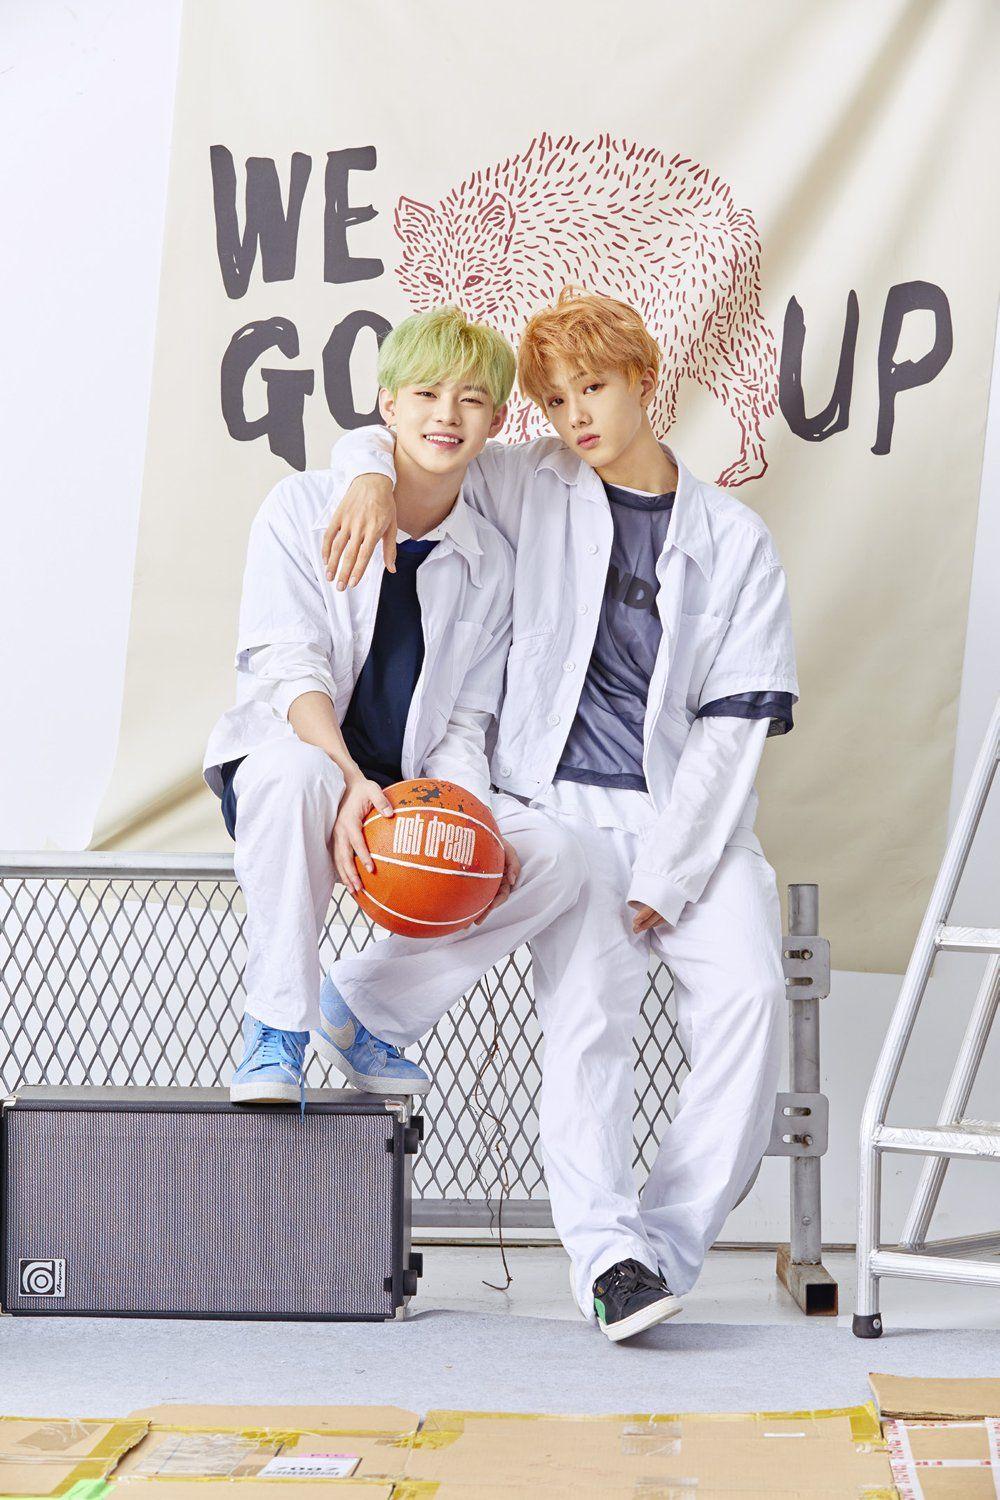 NCT Dream 'We Go Up' ccoemback image